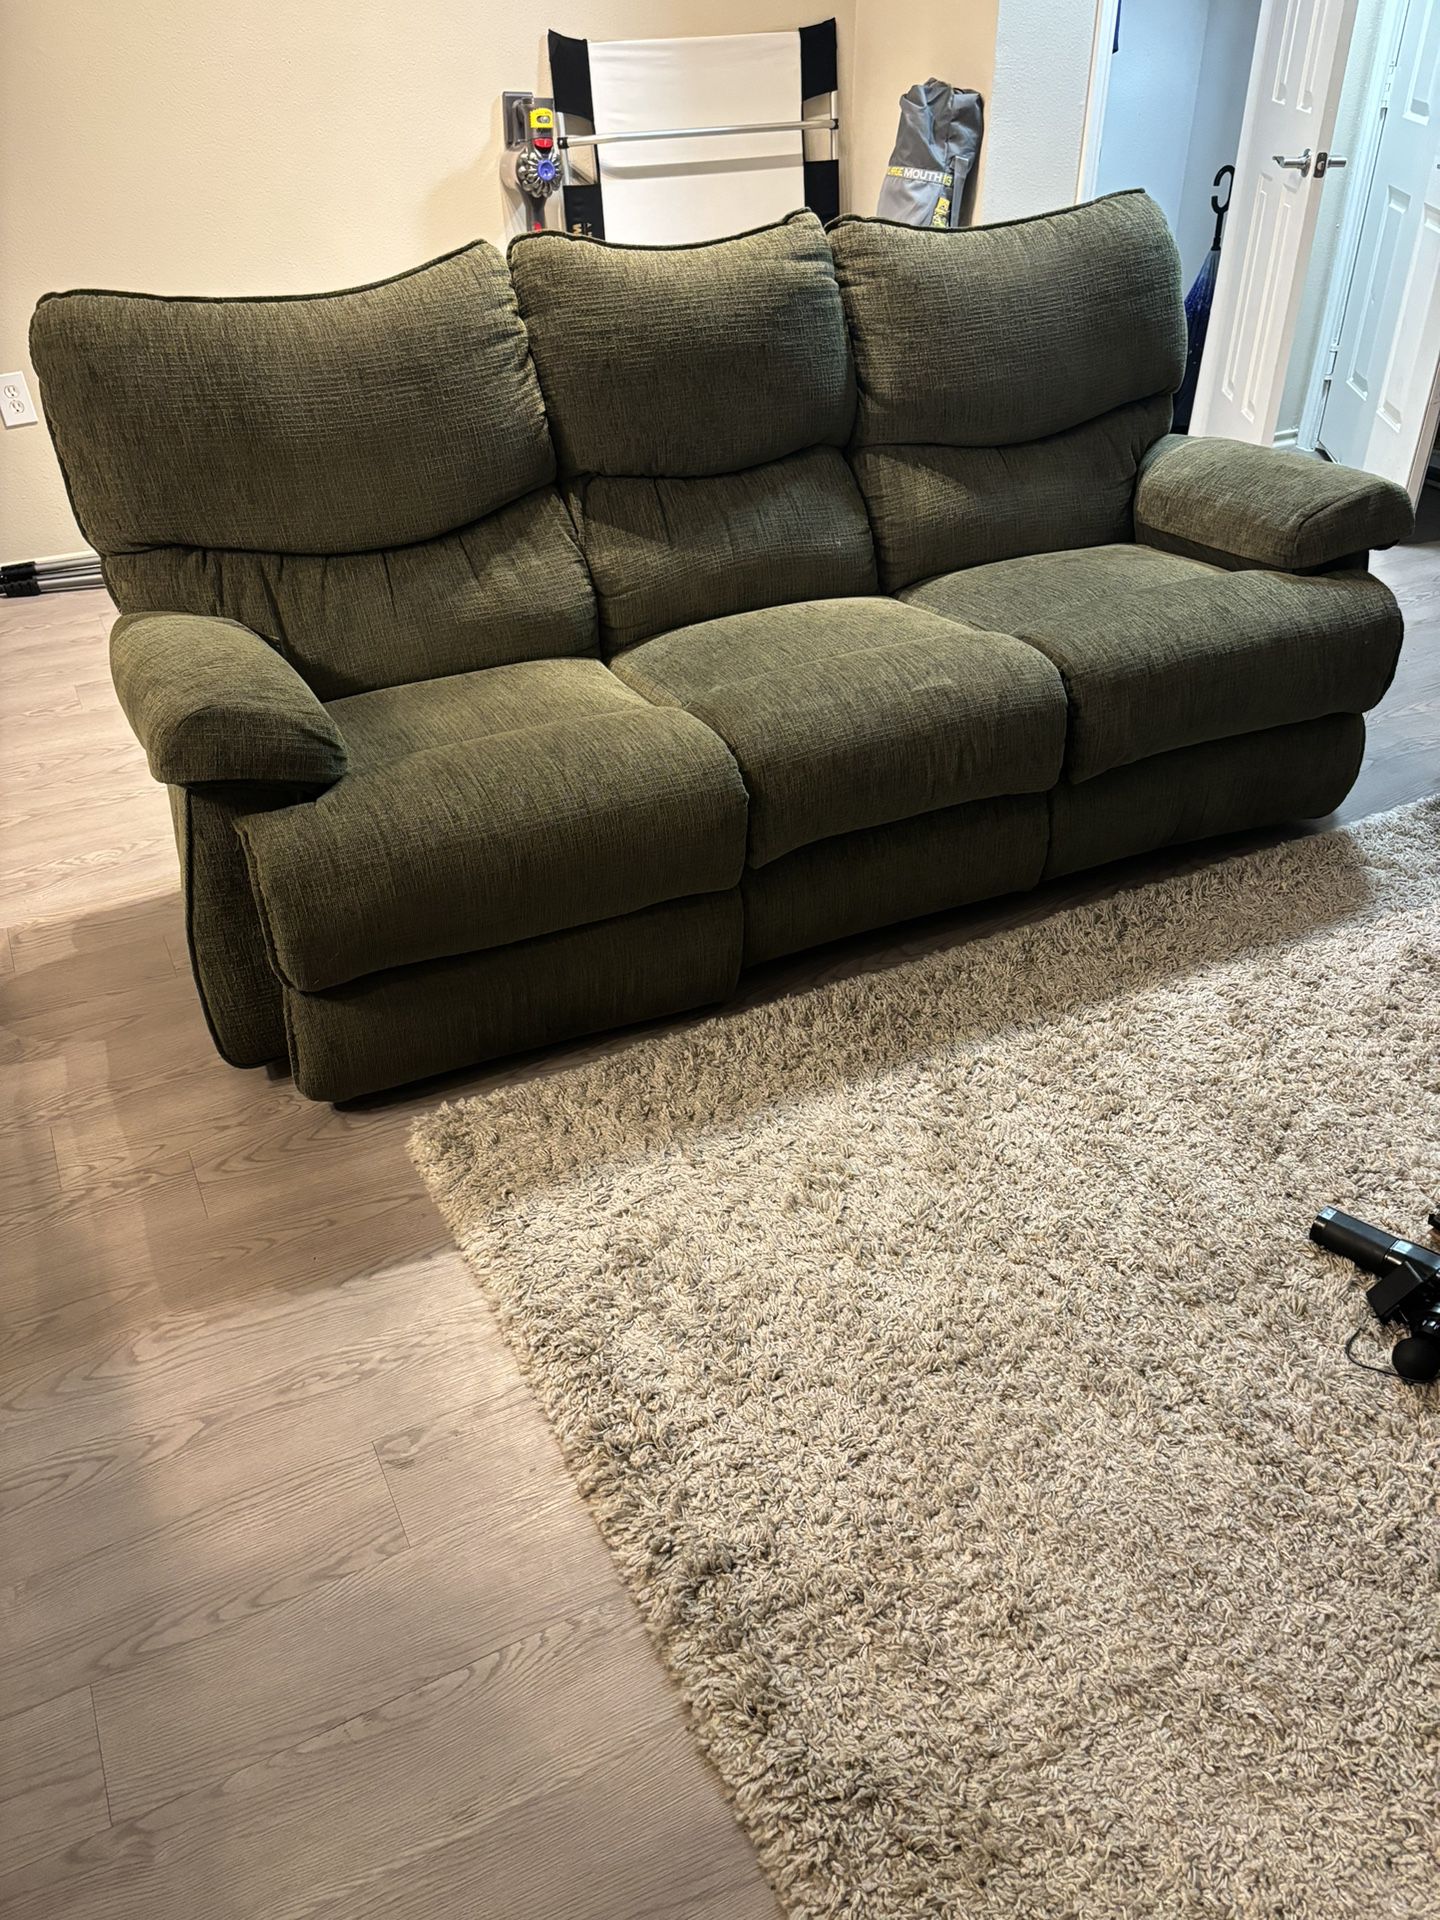 Free! MOViNG! Must Go Couch! Recliner